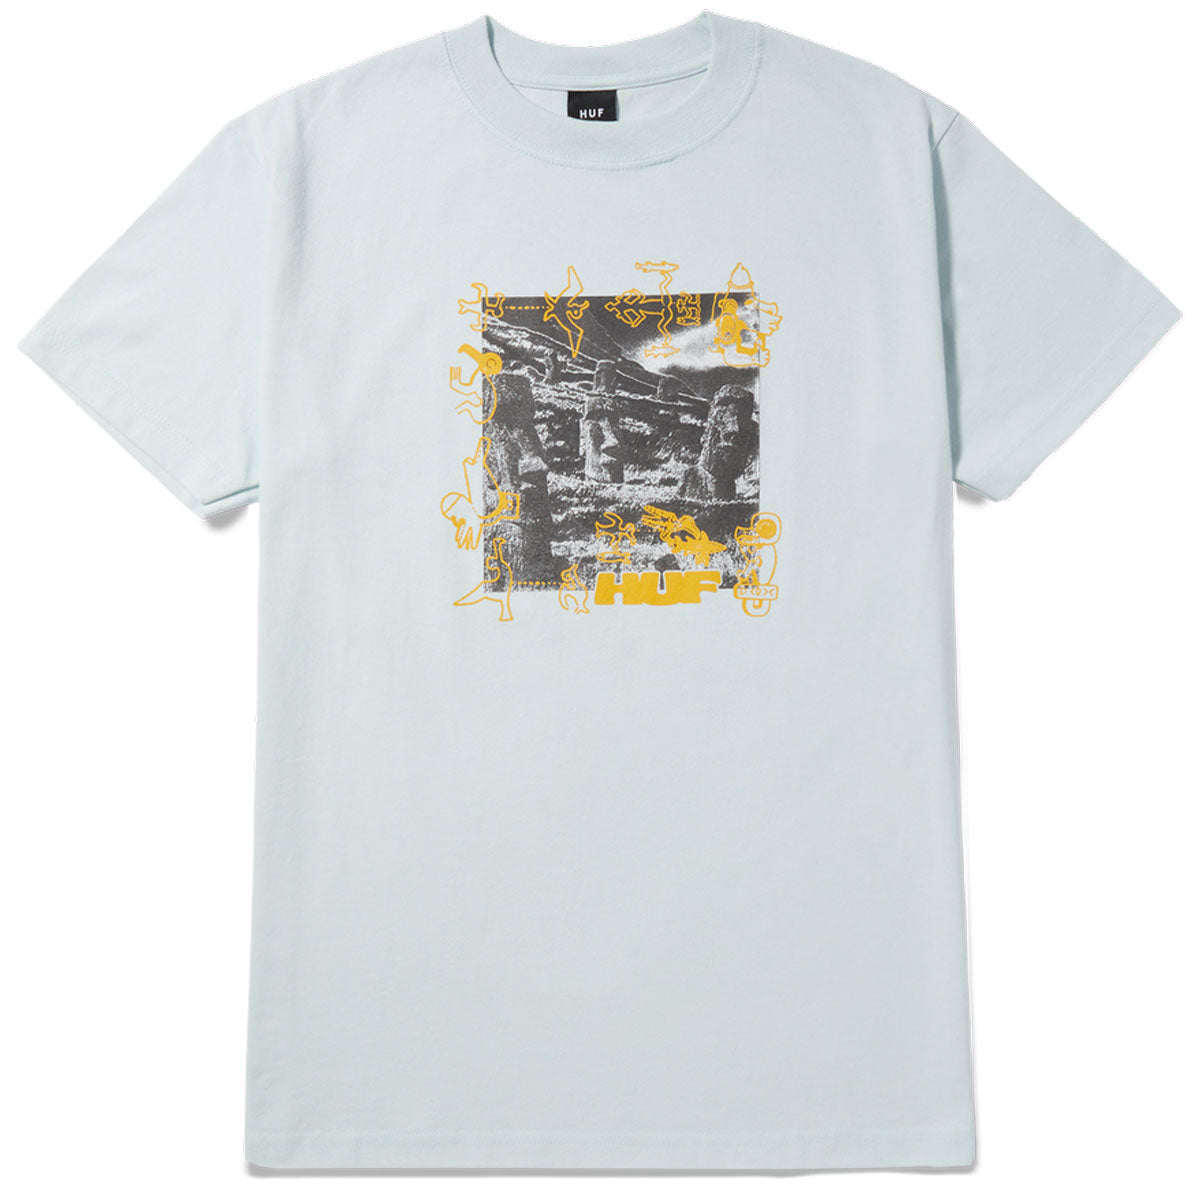 HUF Ancient Mysteries T-Shirt - Sky image 1